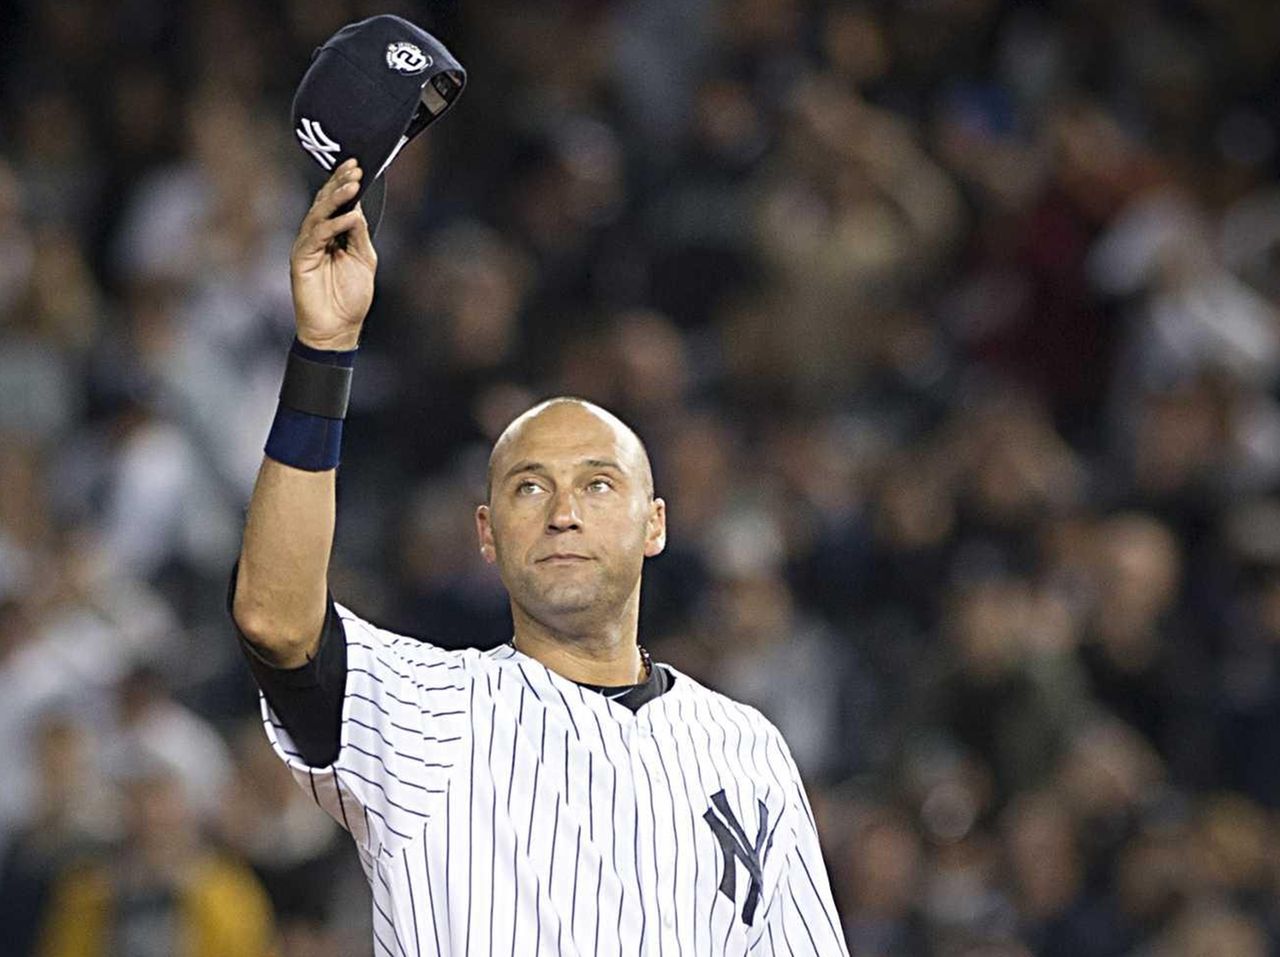 Derek Jeter's No. 2 officially retired by Yankees, National Sports